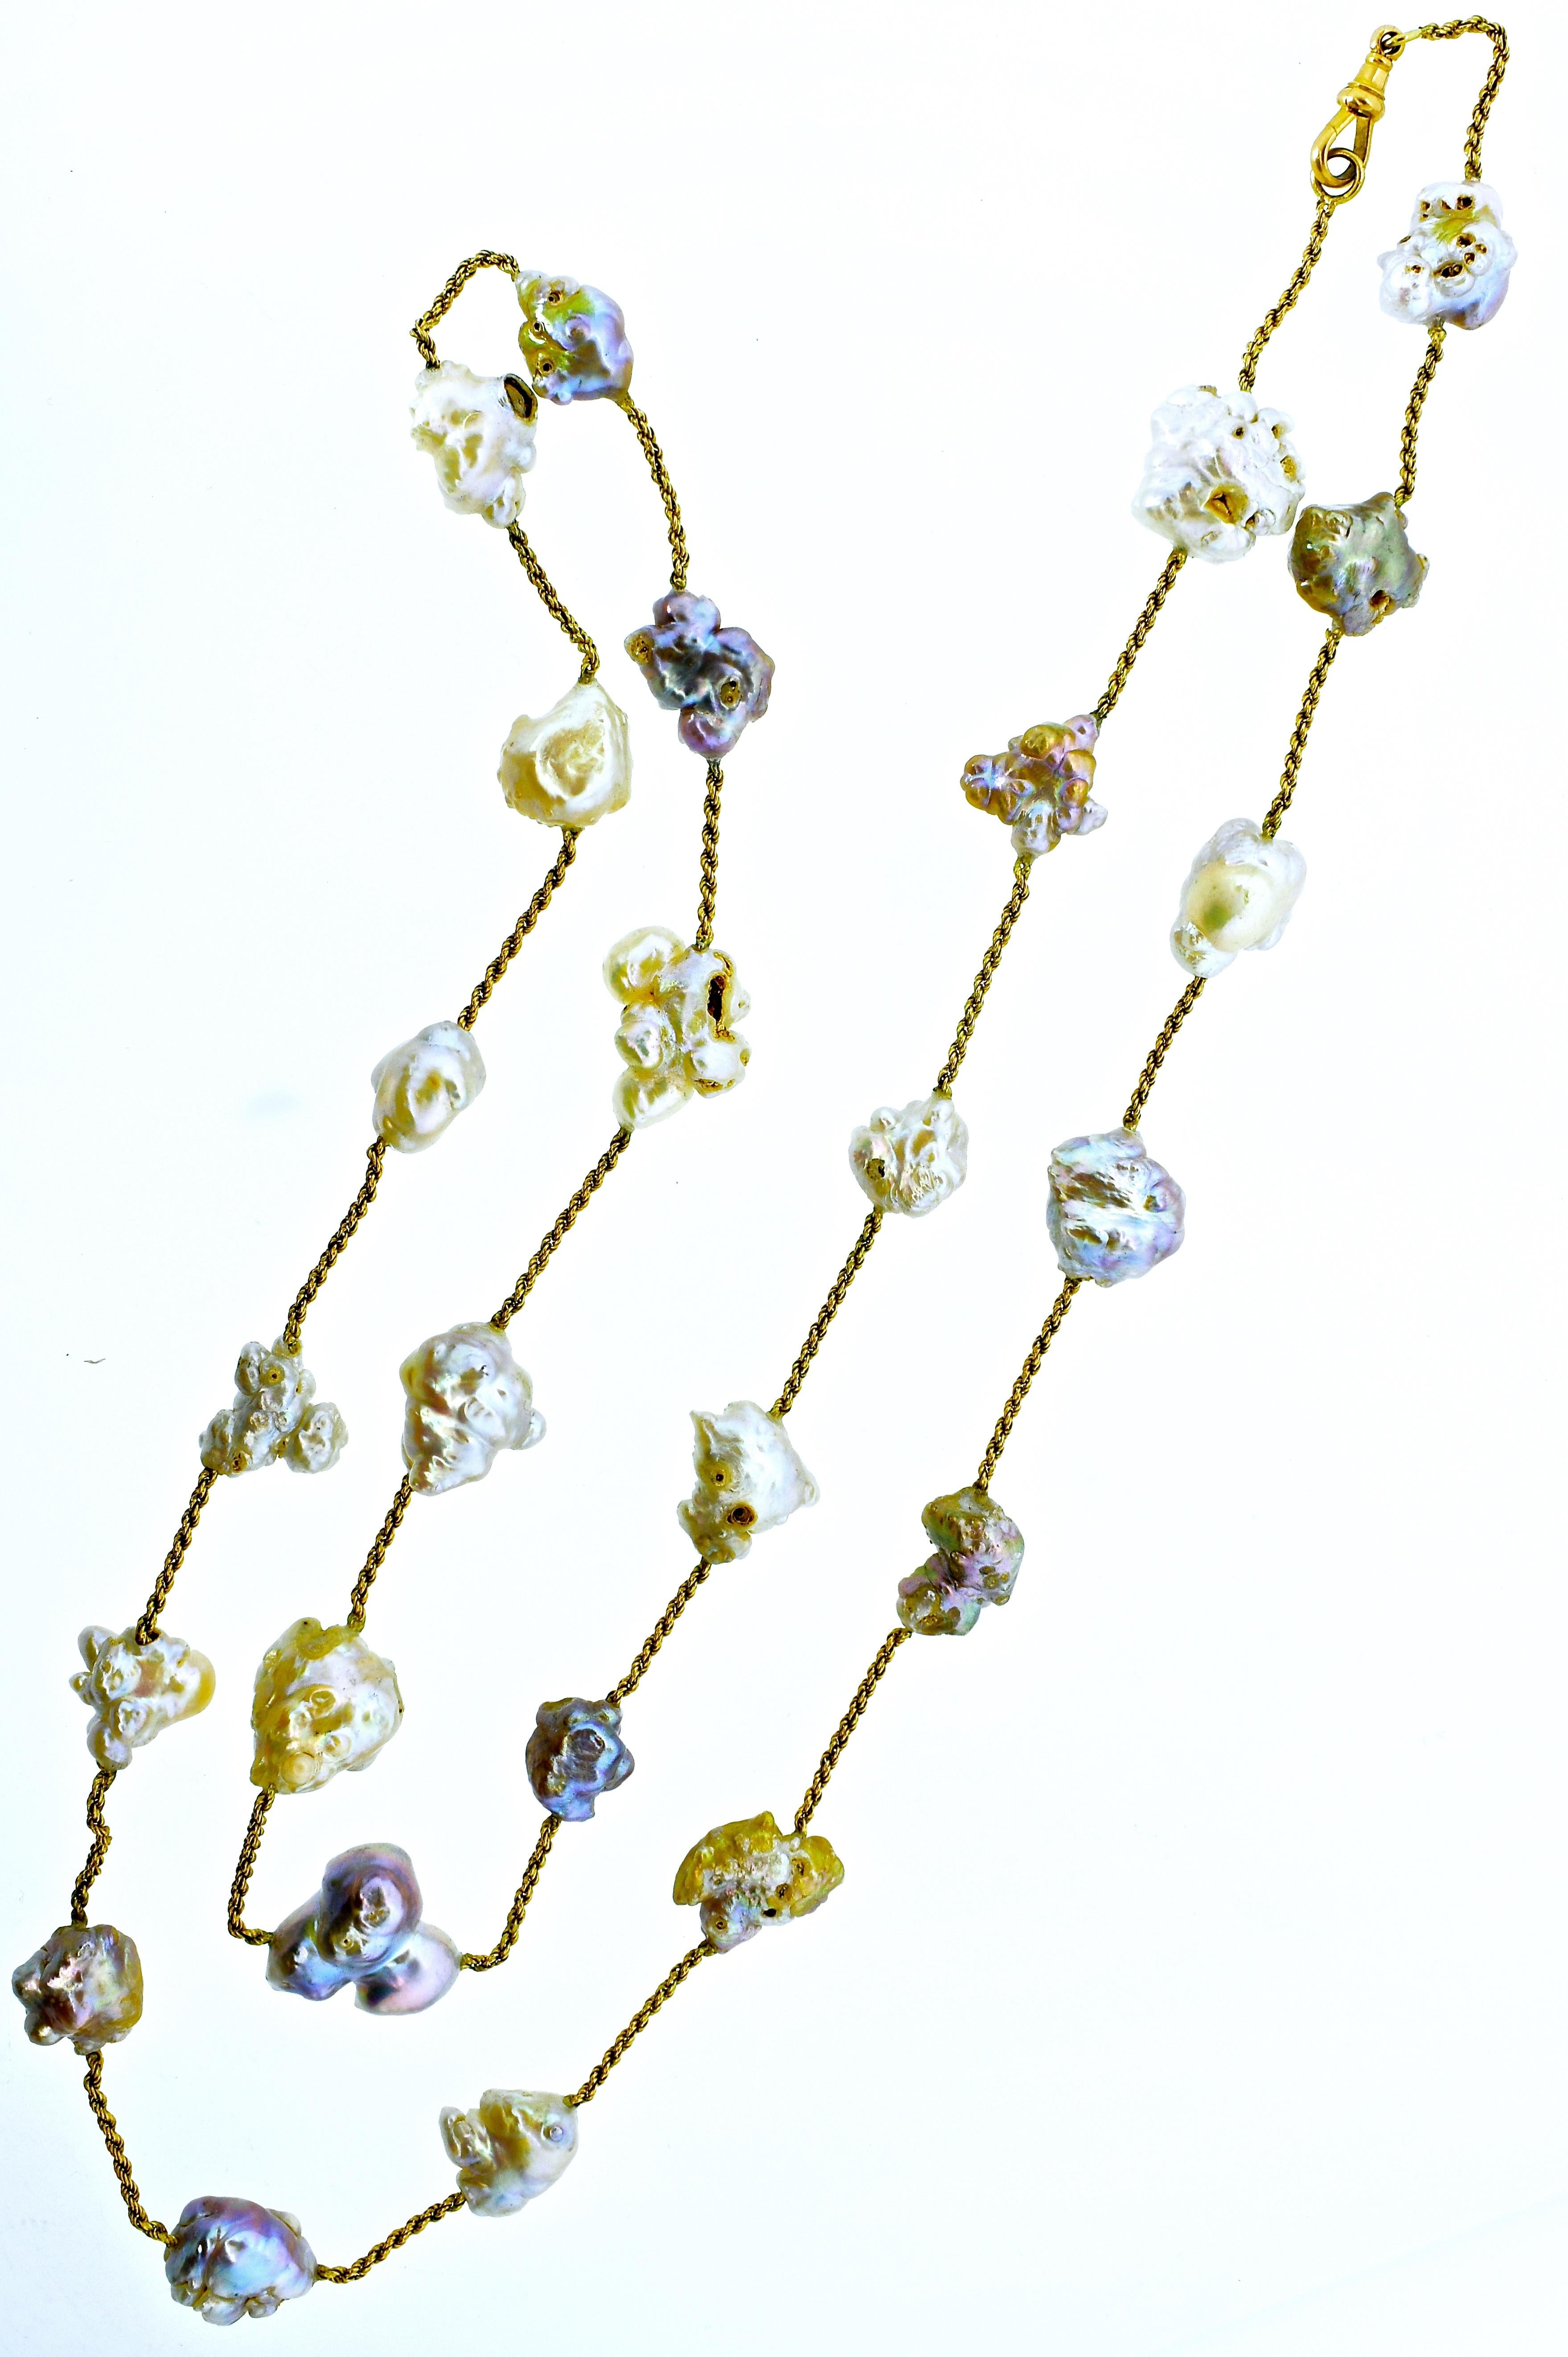 Antique 18K gold chain interspersed with natural fresh water baroque pearls ranging in size from 8 mm up to 22 mm.  These pearls are quite fine and unusual because they were farmed before pollution affects and therefore are large, show a rainbow of